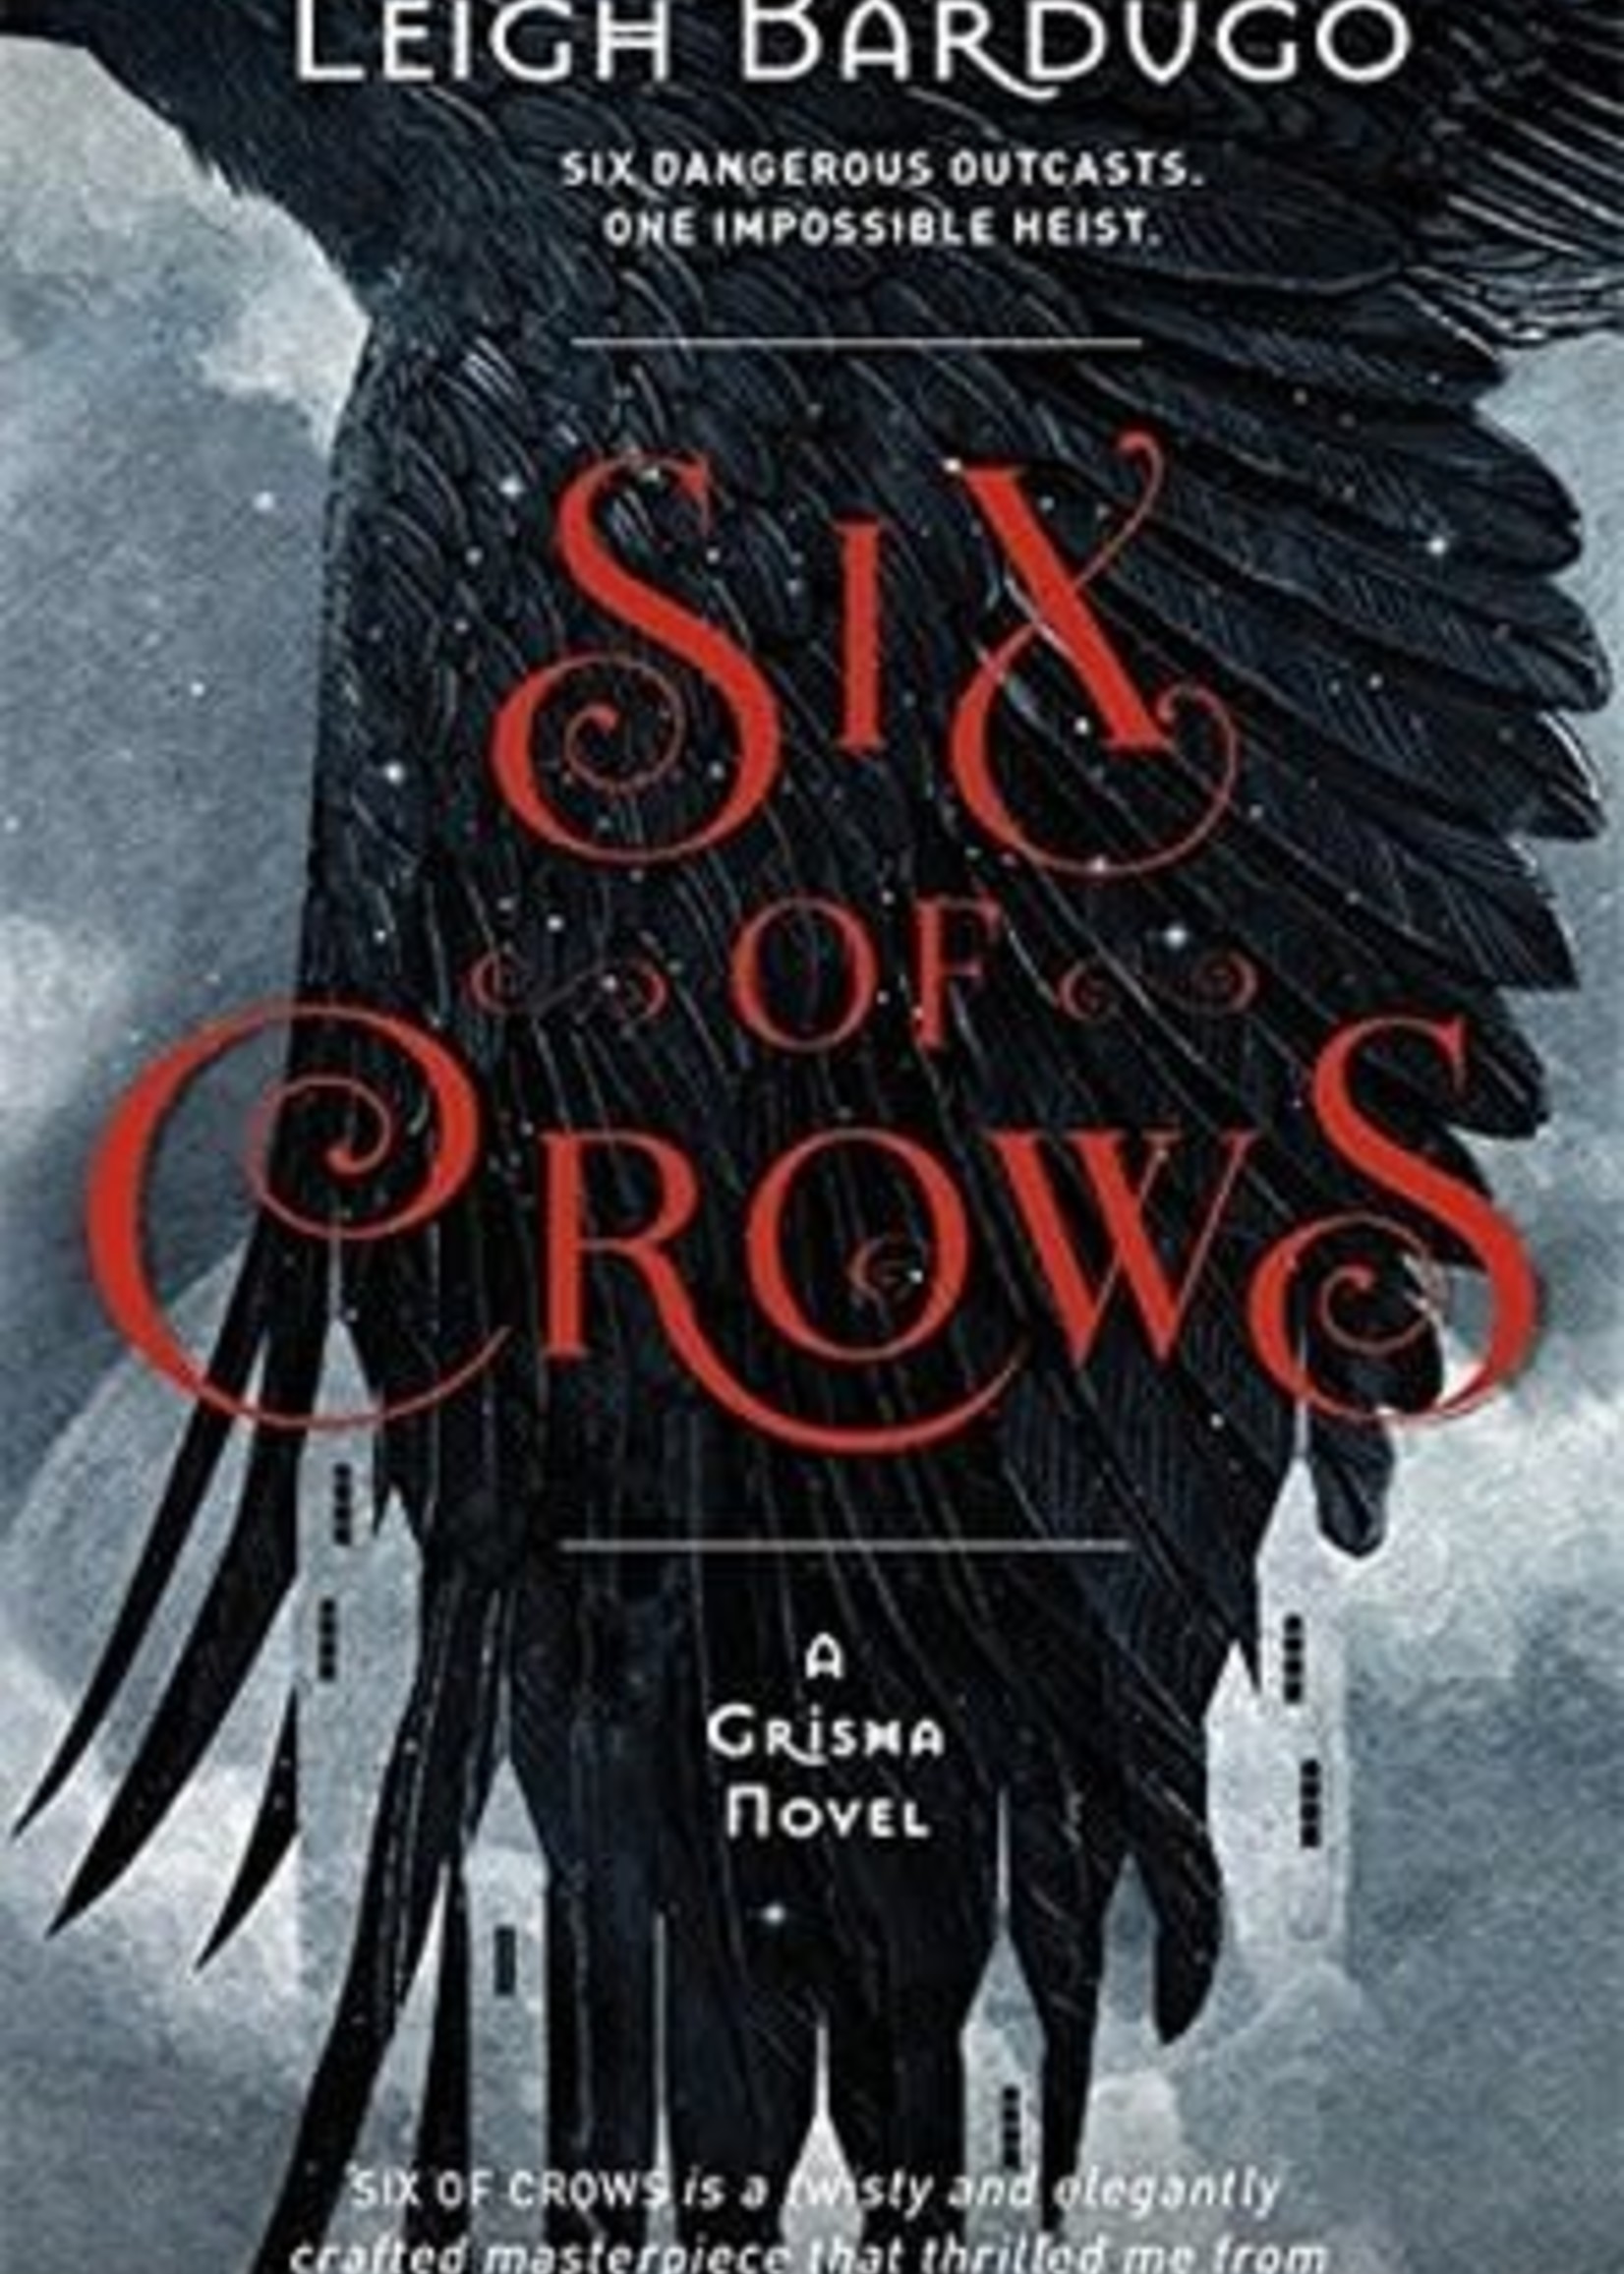 Six of Crows (Six of Crows #1) by Leigh Bardugo